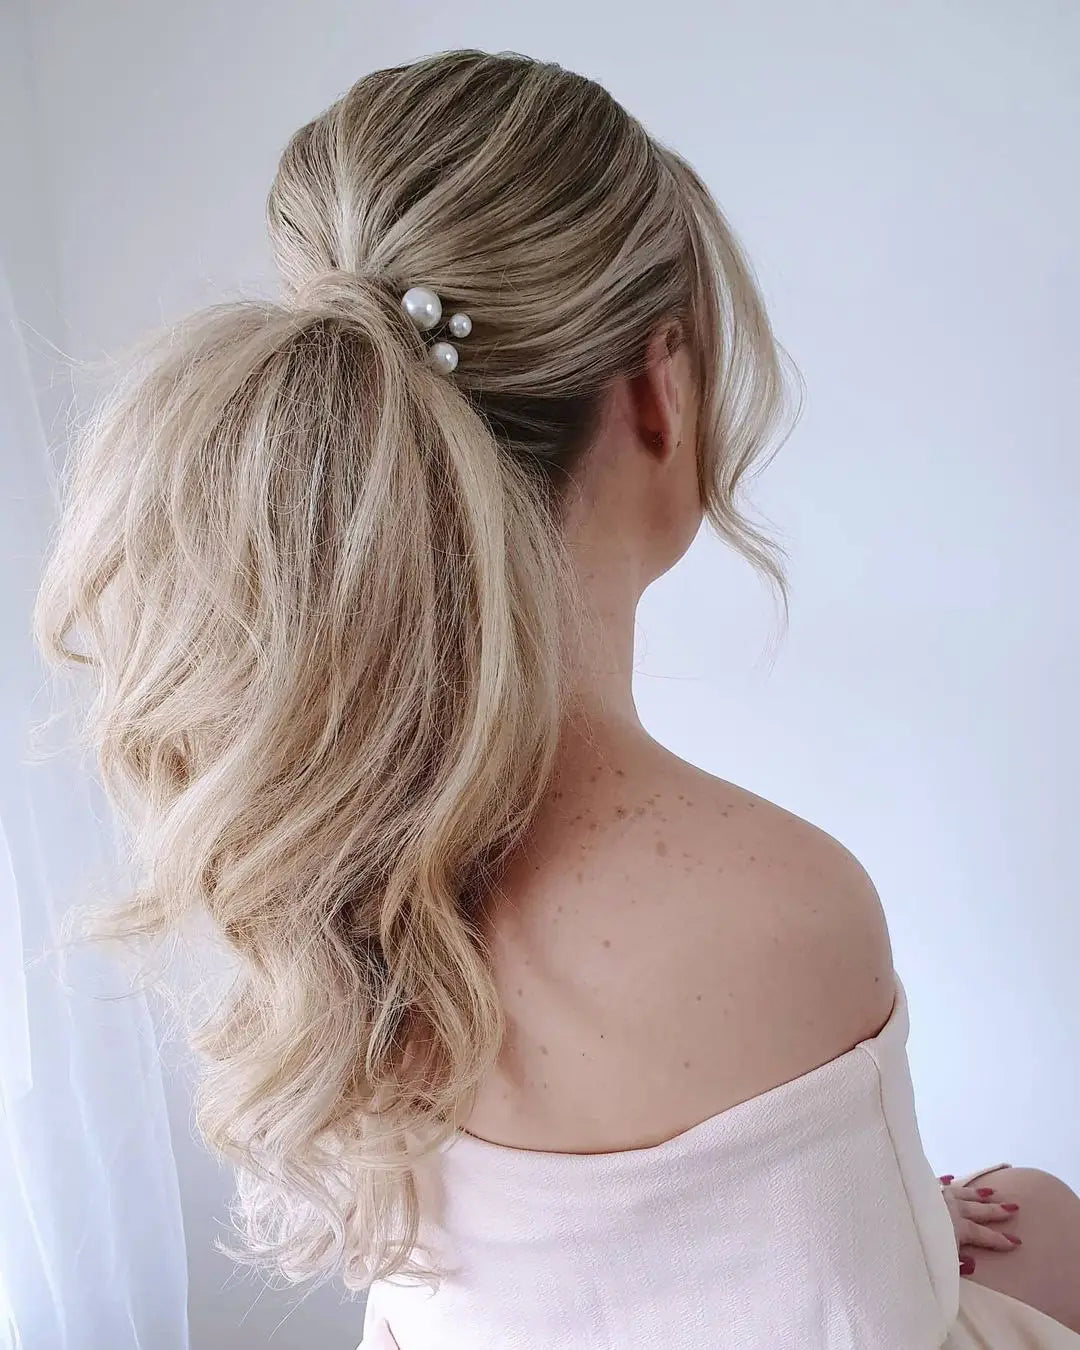 Bridesmaid Hairstyle | Gallery posted by Megan :) | Lemon8